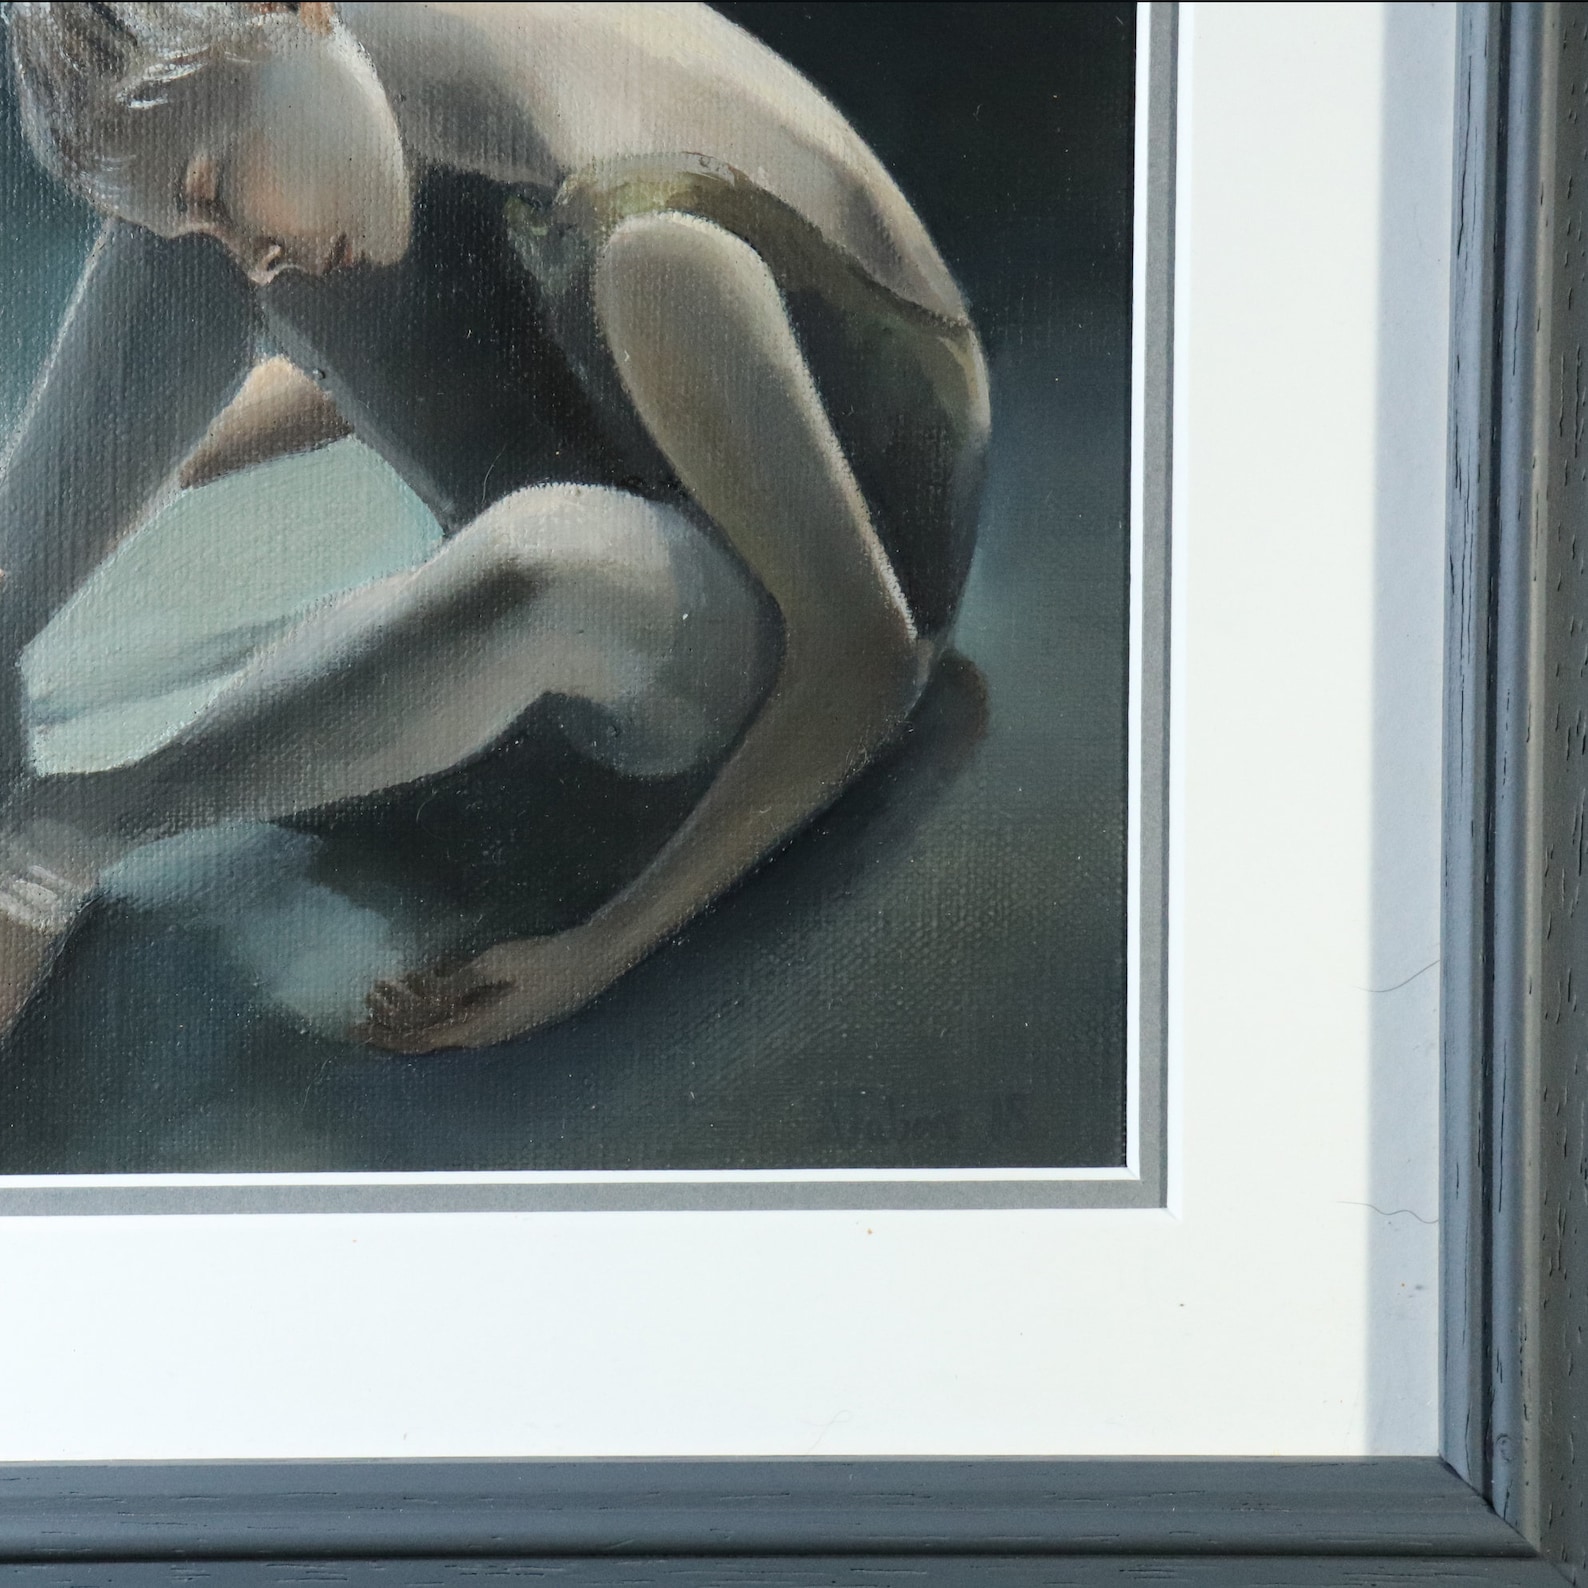 days end, exhausted ballerina, young dancer painting. ballet artwork, not print, original art by alex jabore